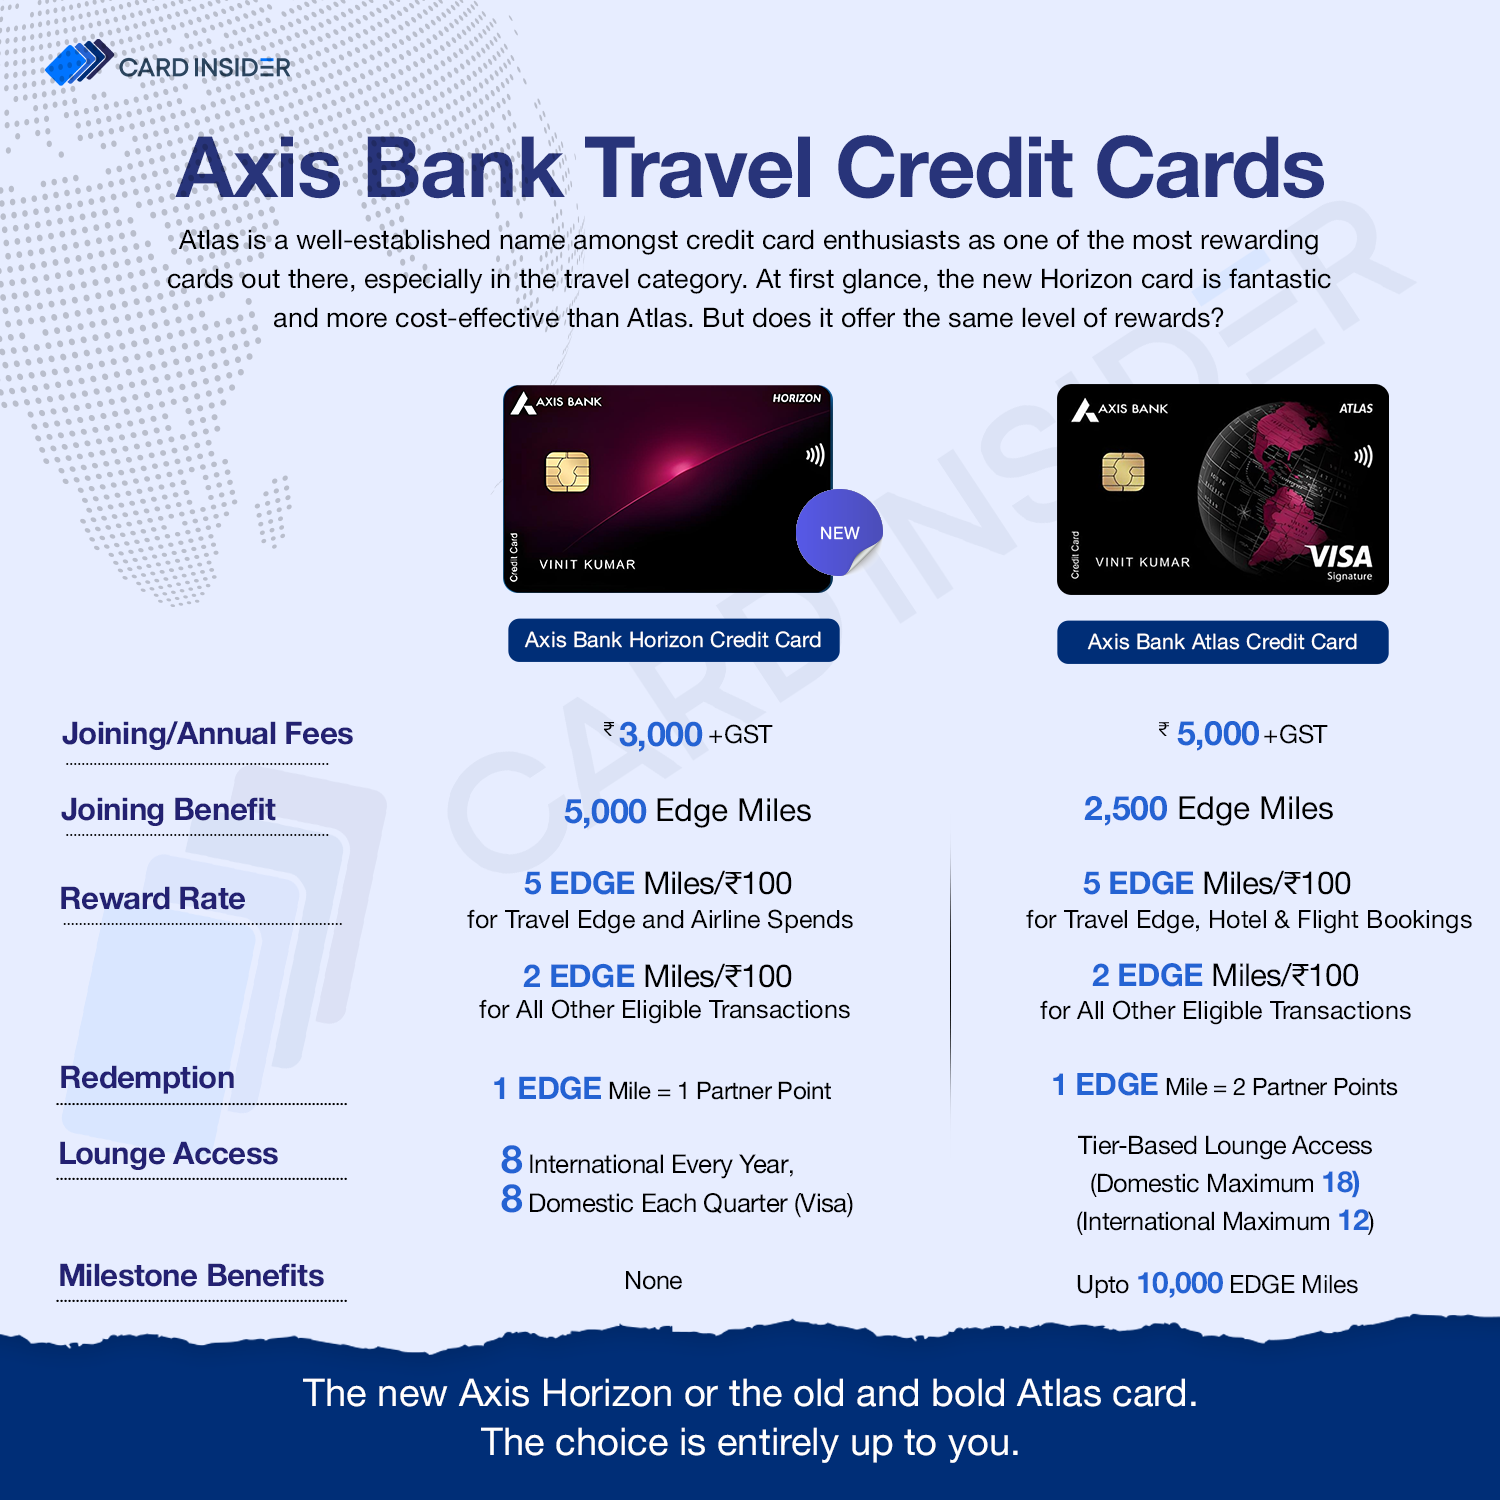 Comparison of Features and Benefits of Axis Atlas and Horizon Credit Card